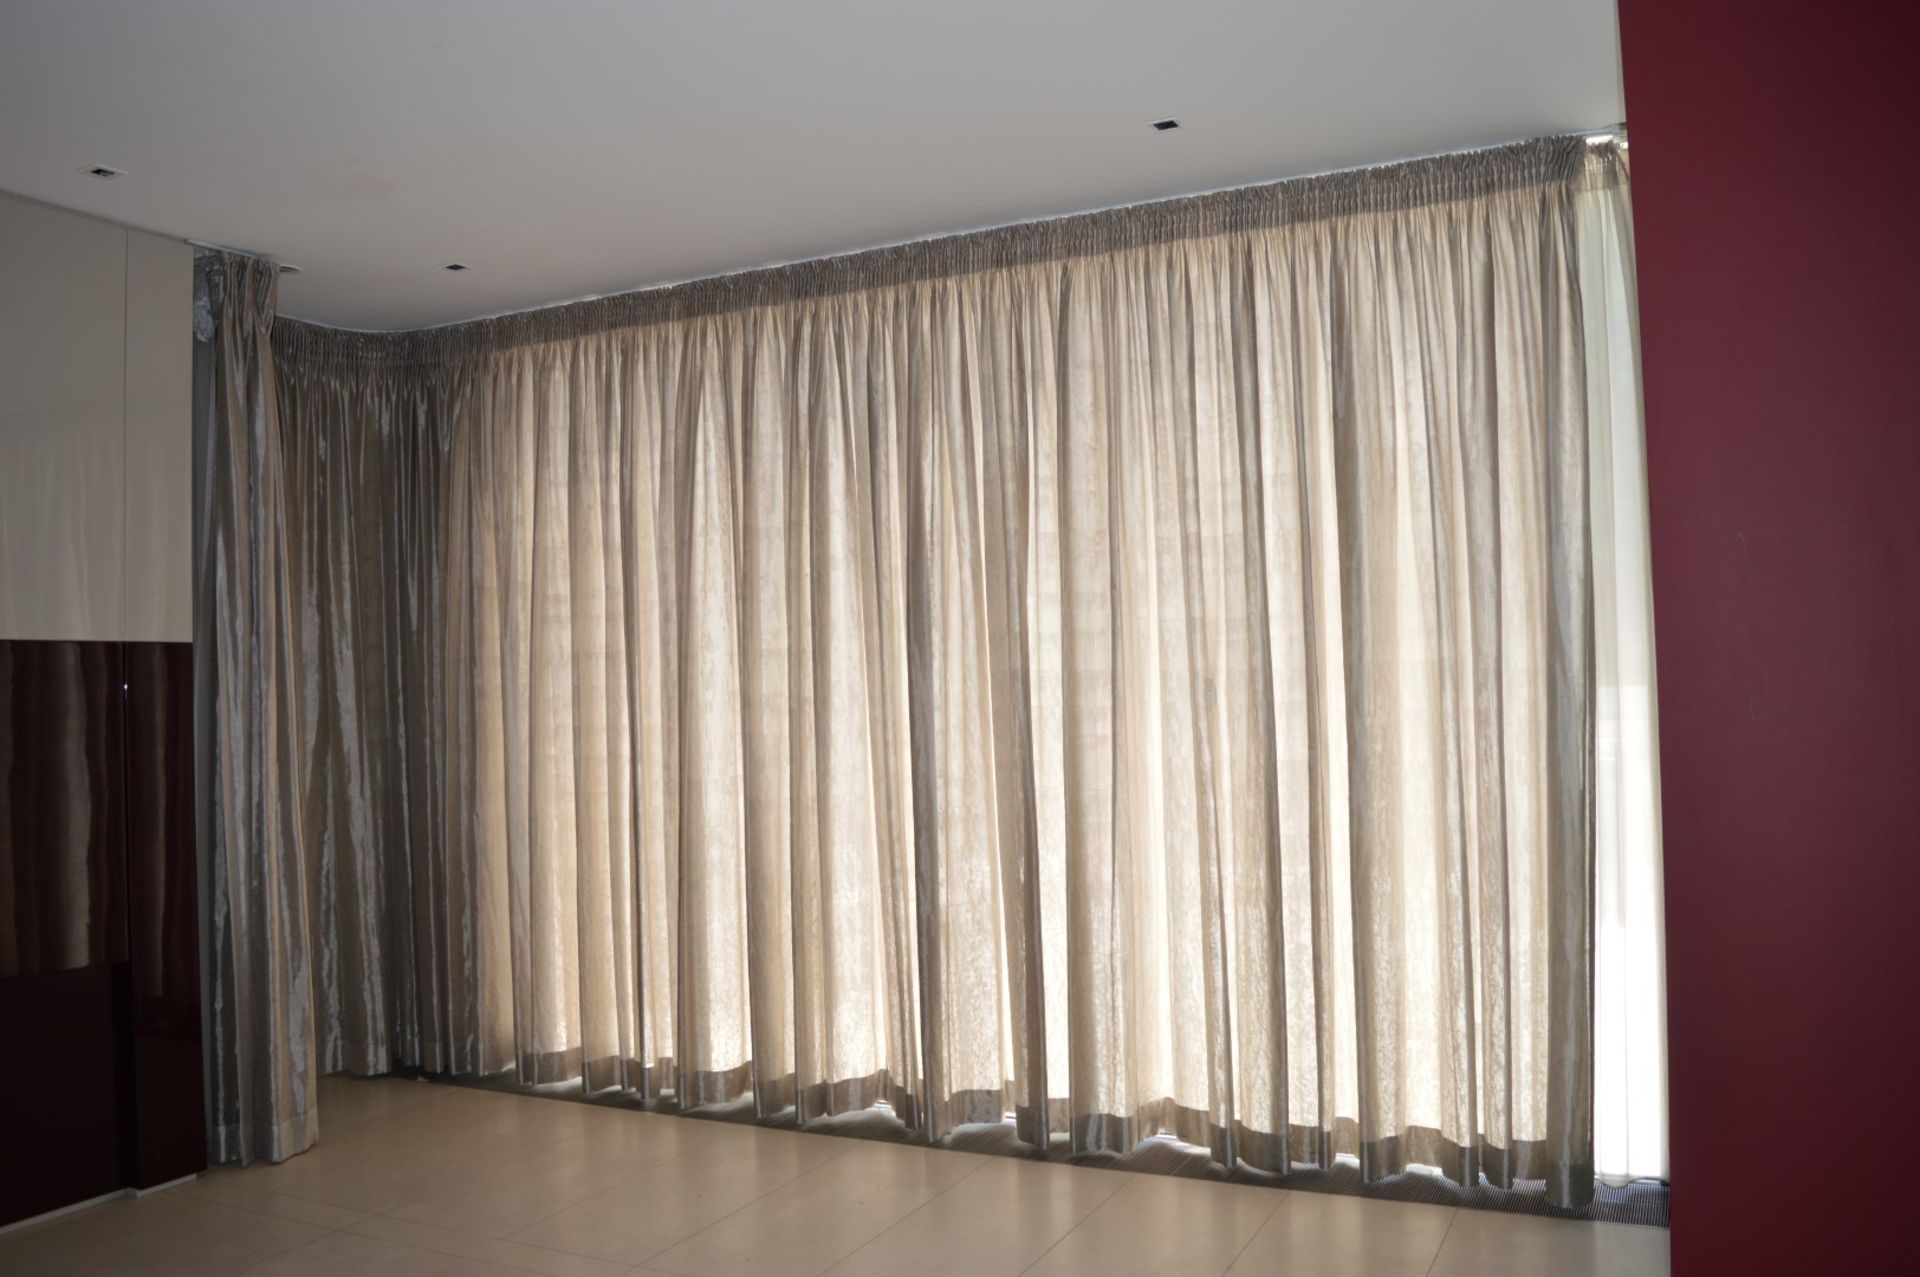 1 x Set of Curtains With Electric Motor - Ref 73 - Approx Length 800cm x Drop 307 cms - CL230 - - Image 2 of 7